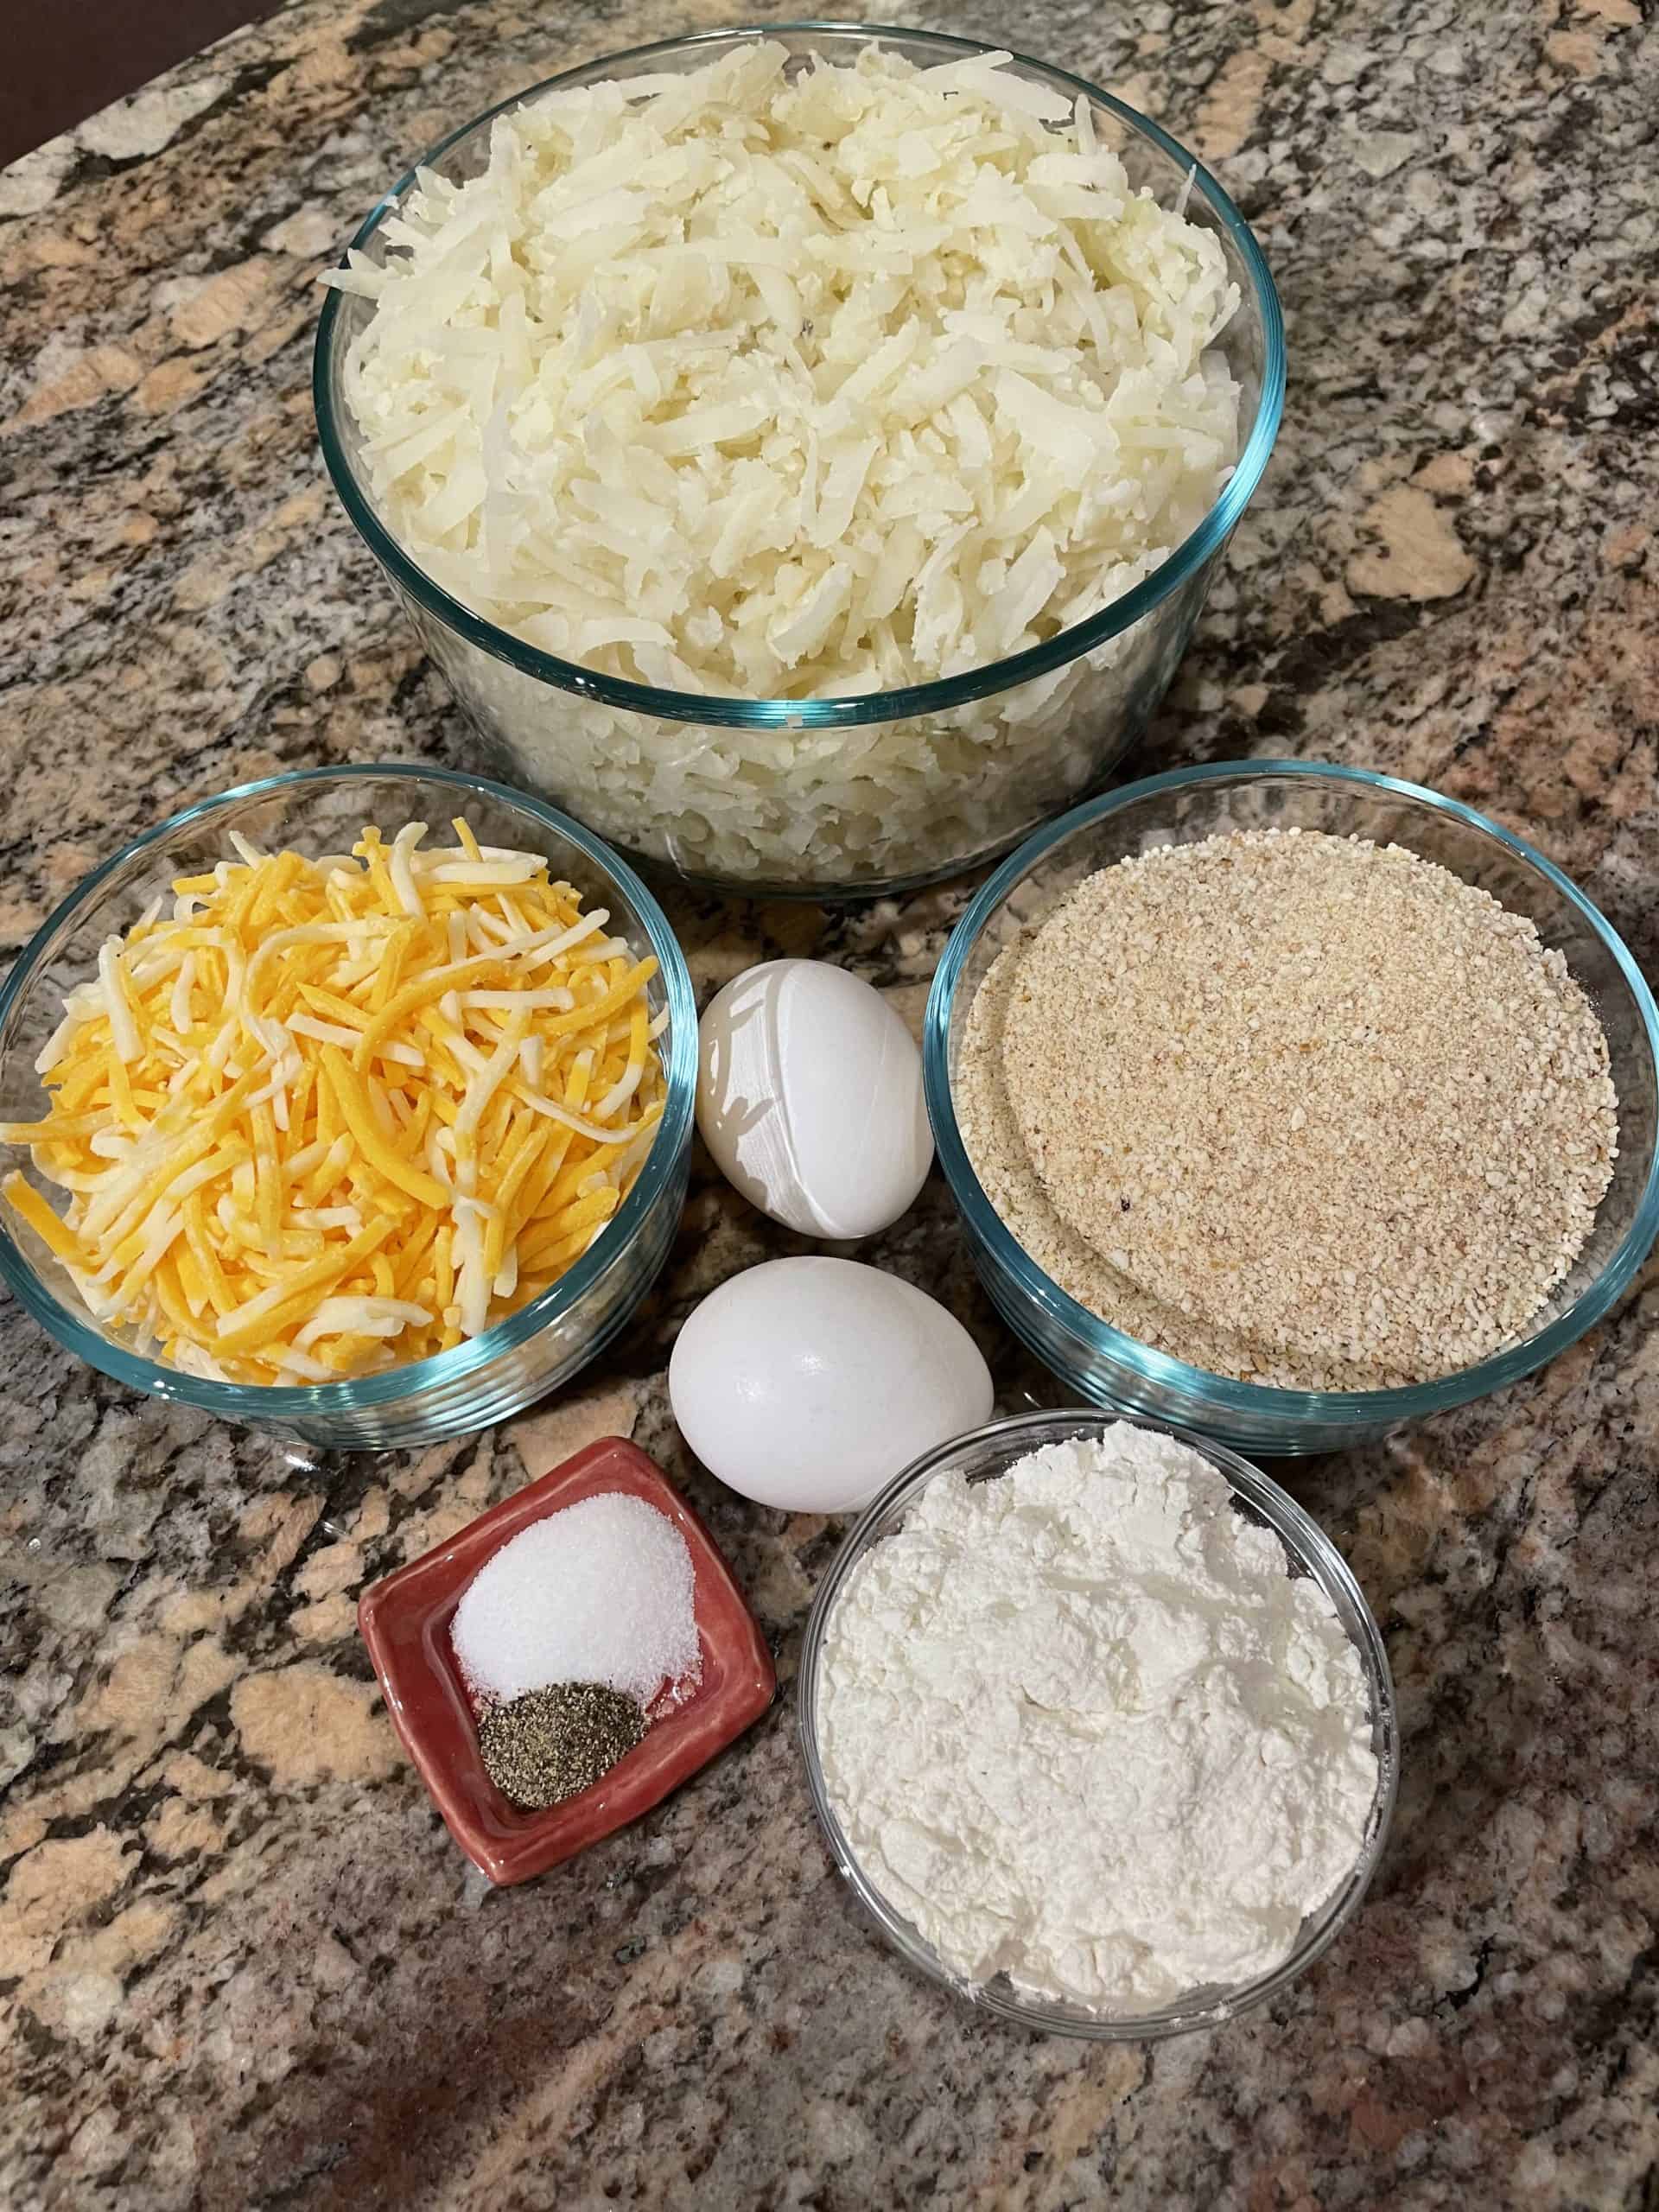 Cheesy Tater Tots Ingredients - shredded potatoes and cheese, flour, eggs, breadcrumbs, salt and pepper.